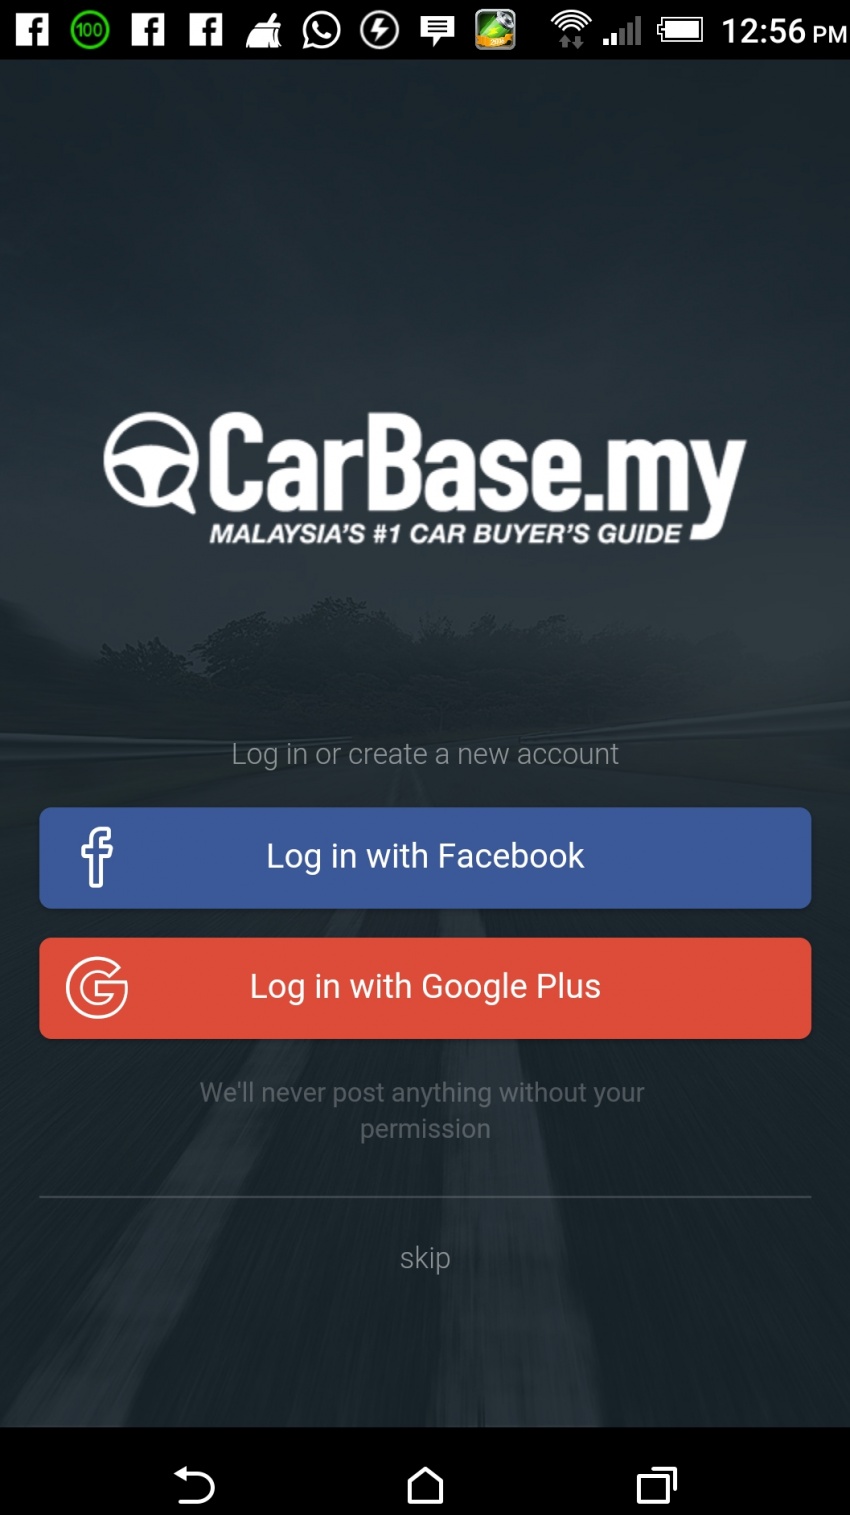 CarBase.my – Android app now available for download 592307